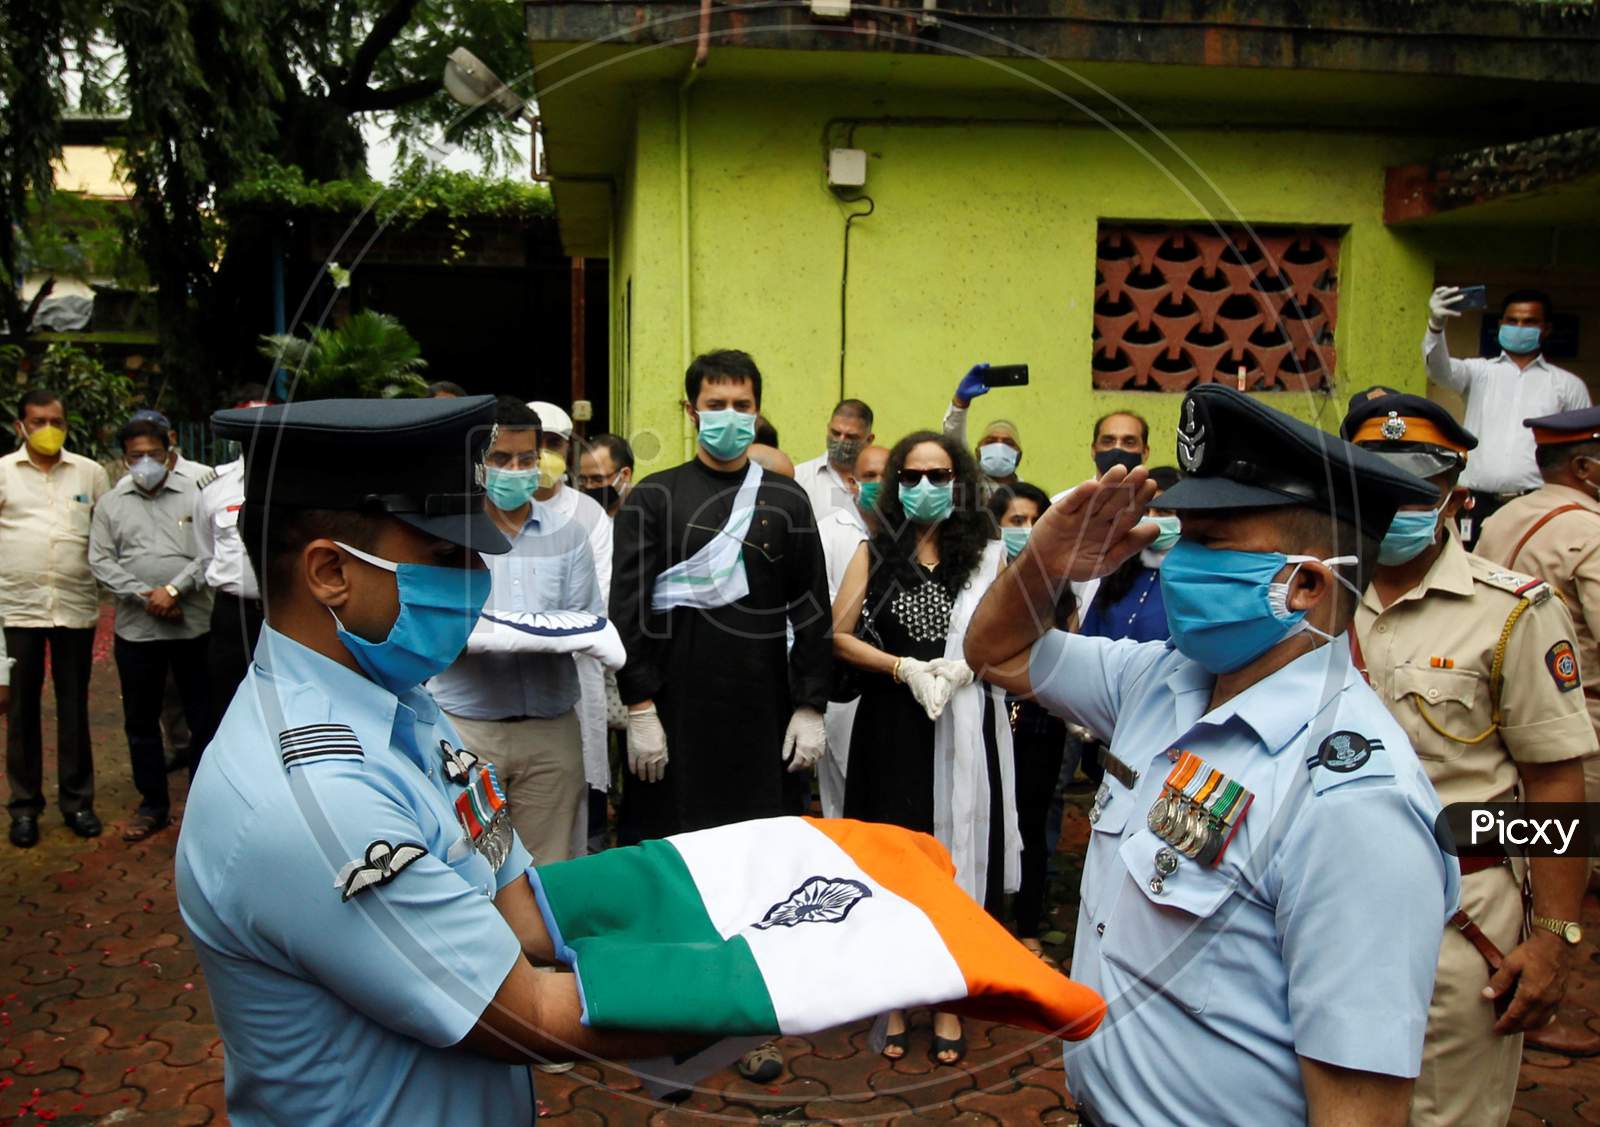 Naval staff pay respect to deceased Air India pilot Deepak Sathe, as family members look on during his funeral in Mumbai, India on August 11, 2020.